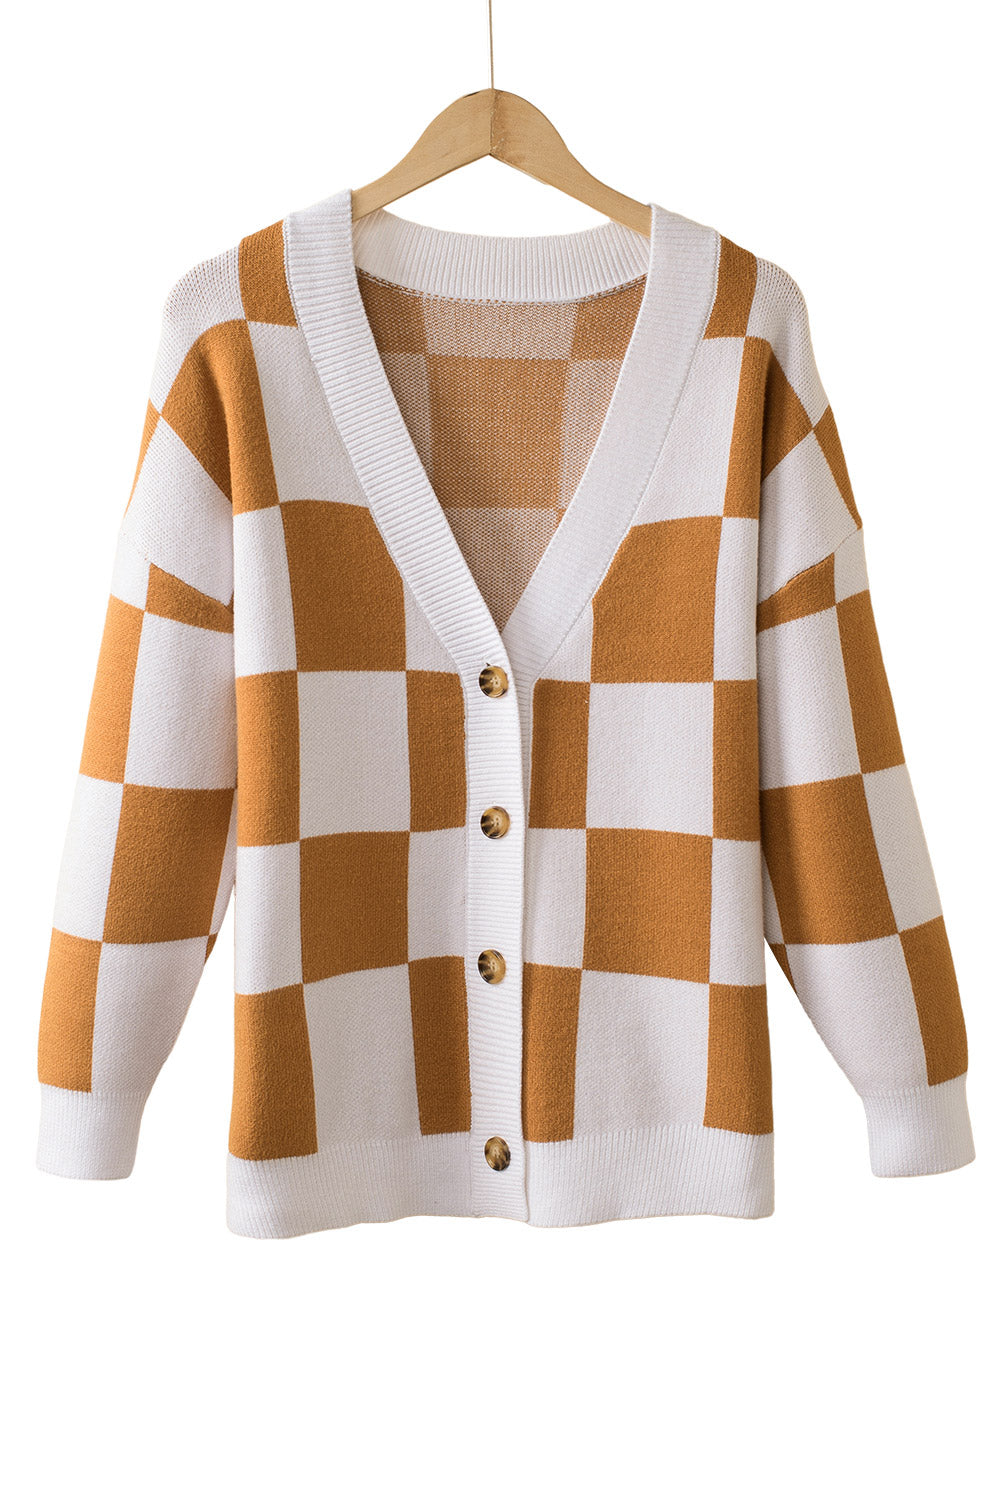 LC271943-17-S, LC271943-17-M, LC271943-17-L, LC271943-17-XL, LC271943-17-2XL, Brown Contrast Checkered Print Button Up Sweater Cardigan 